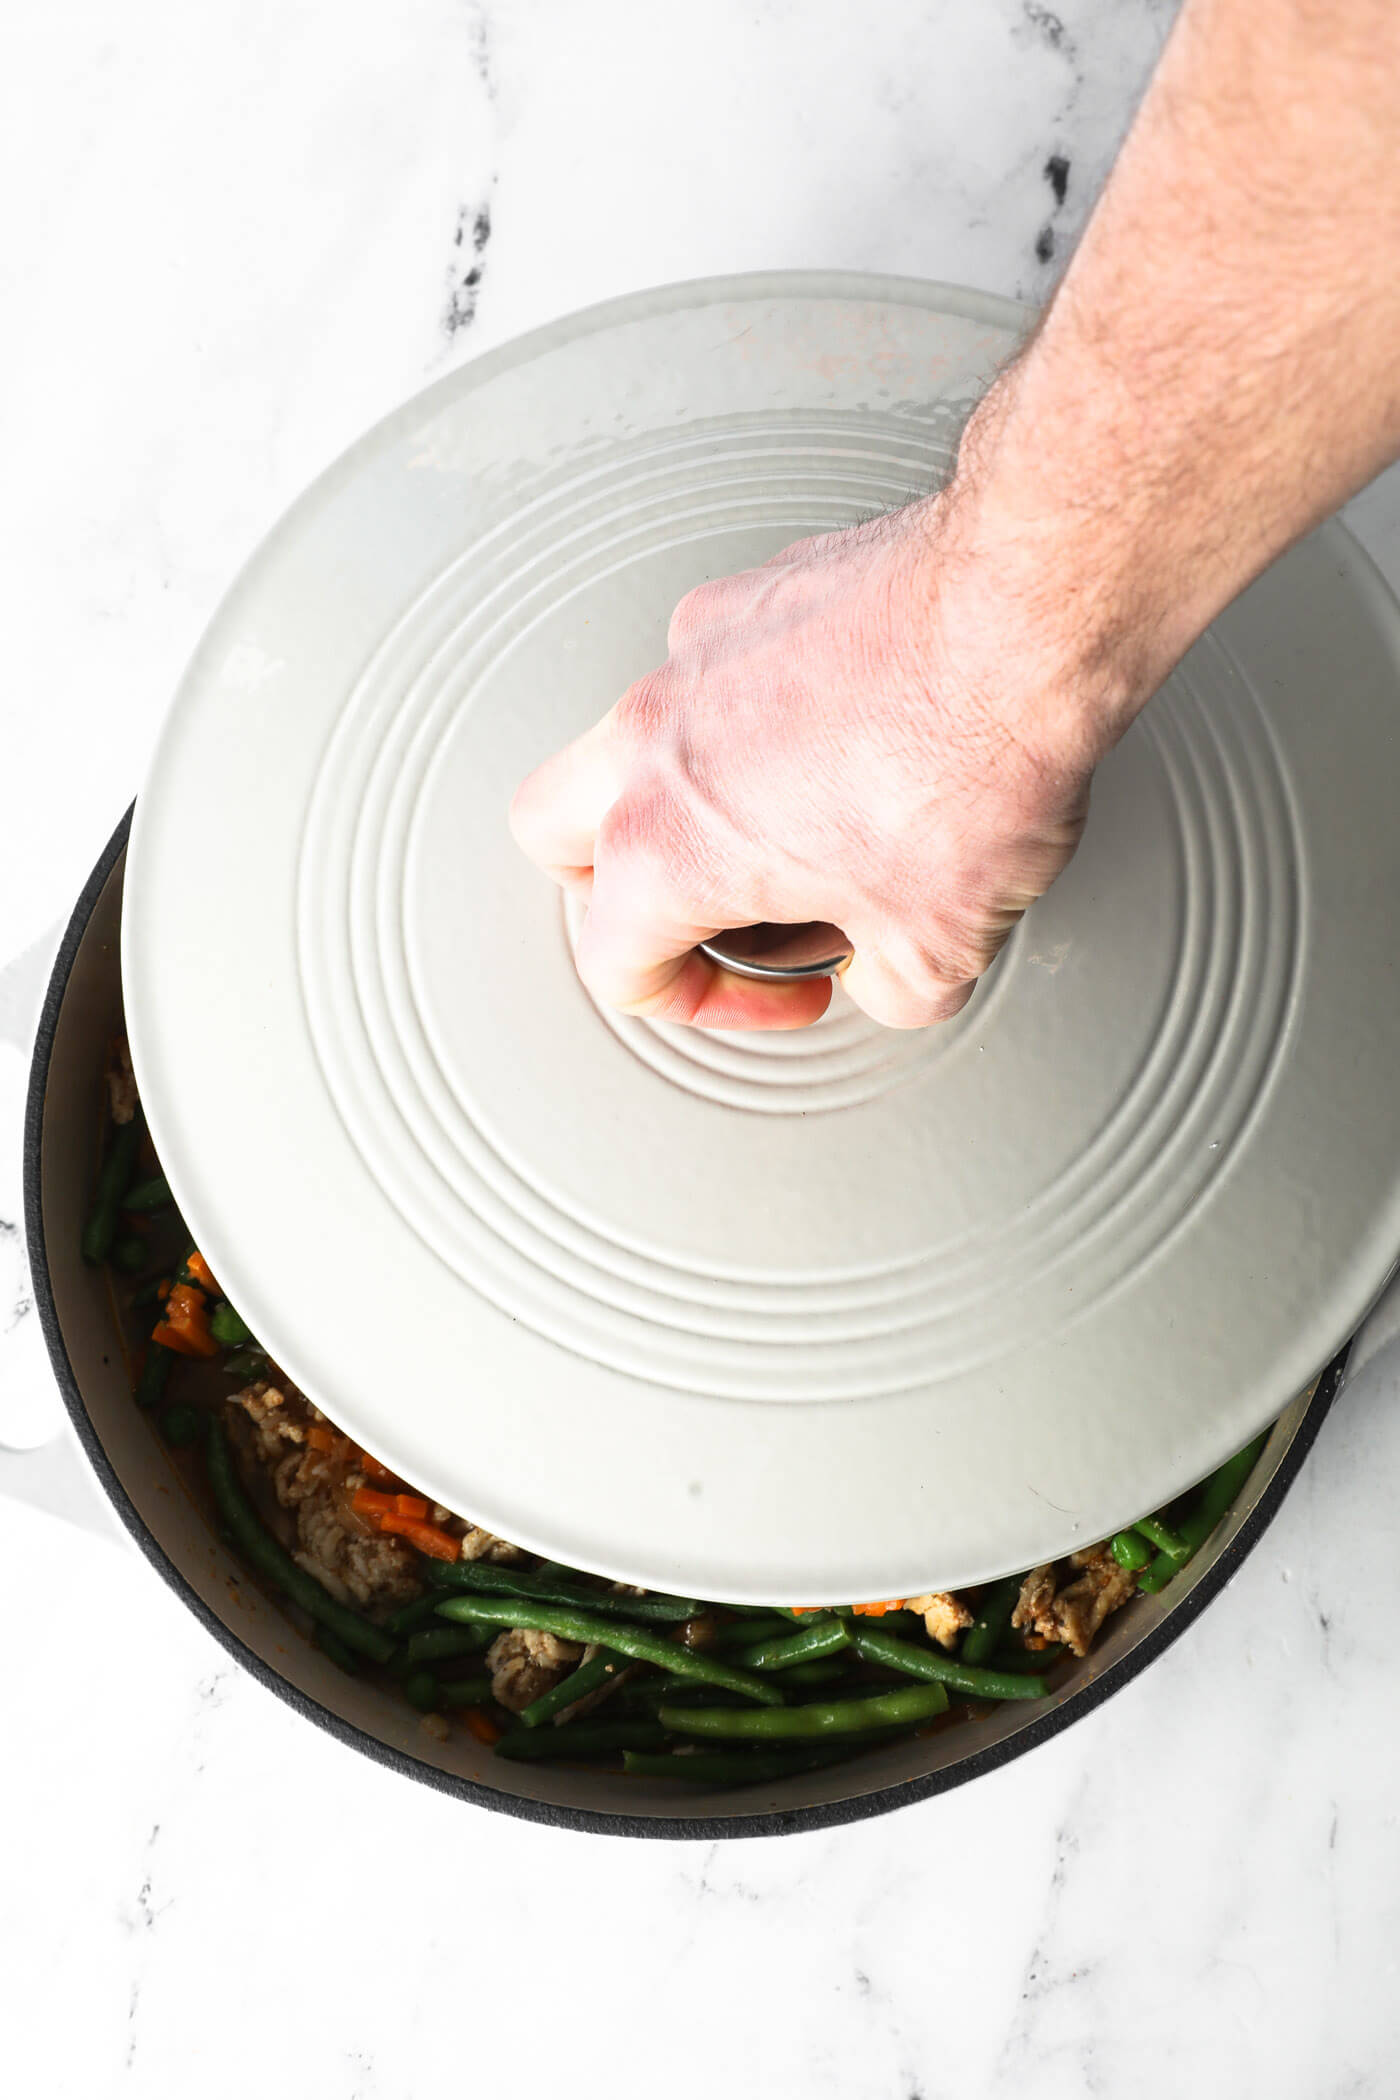 Placing the lid on the skillet.